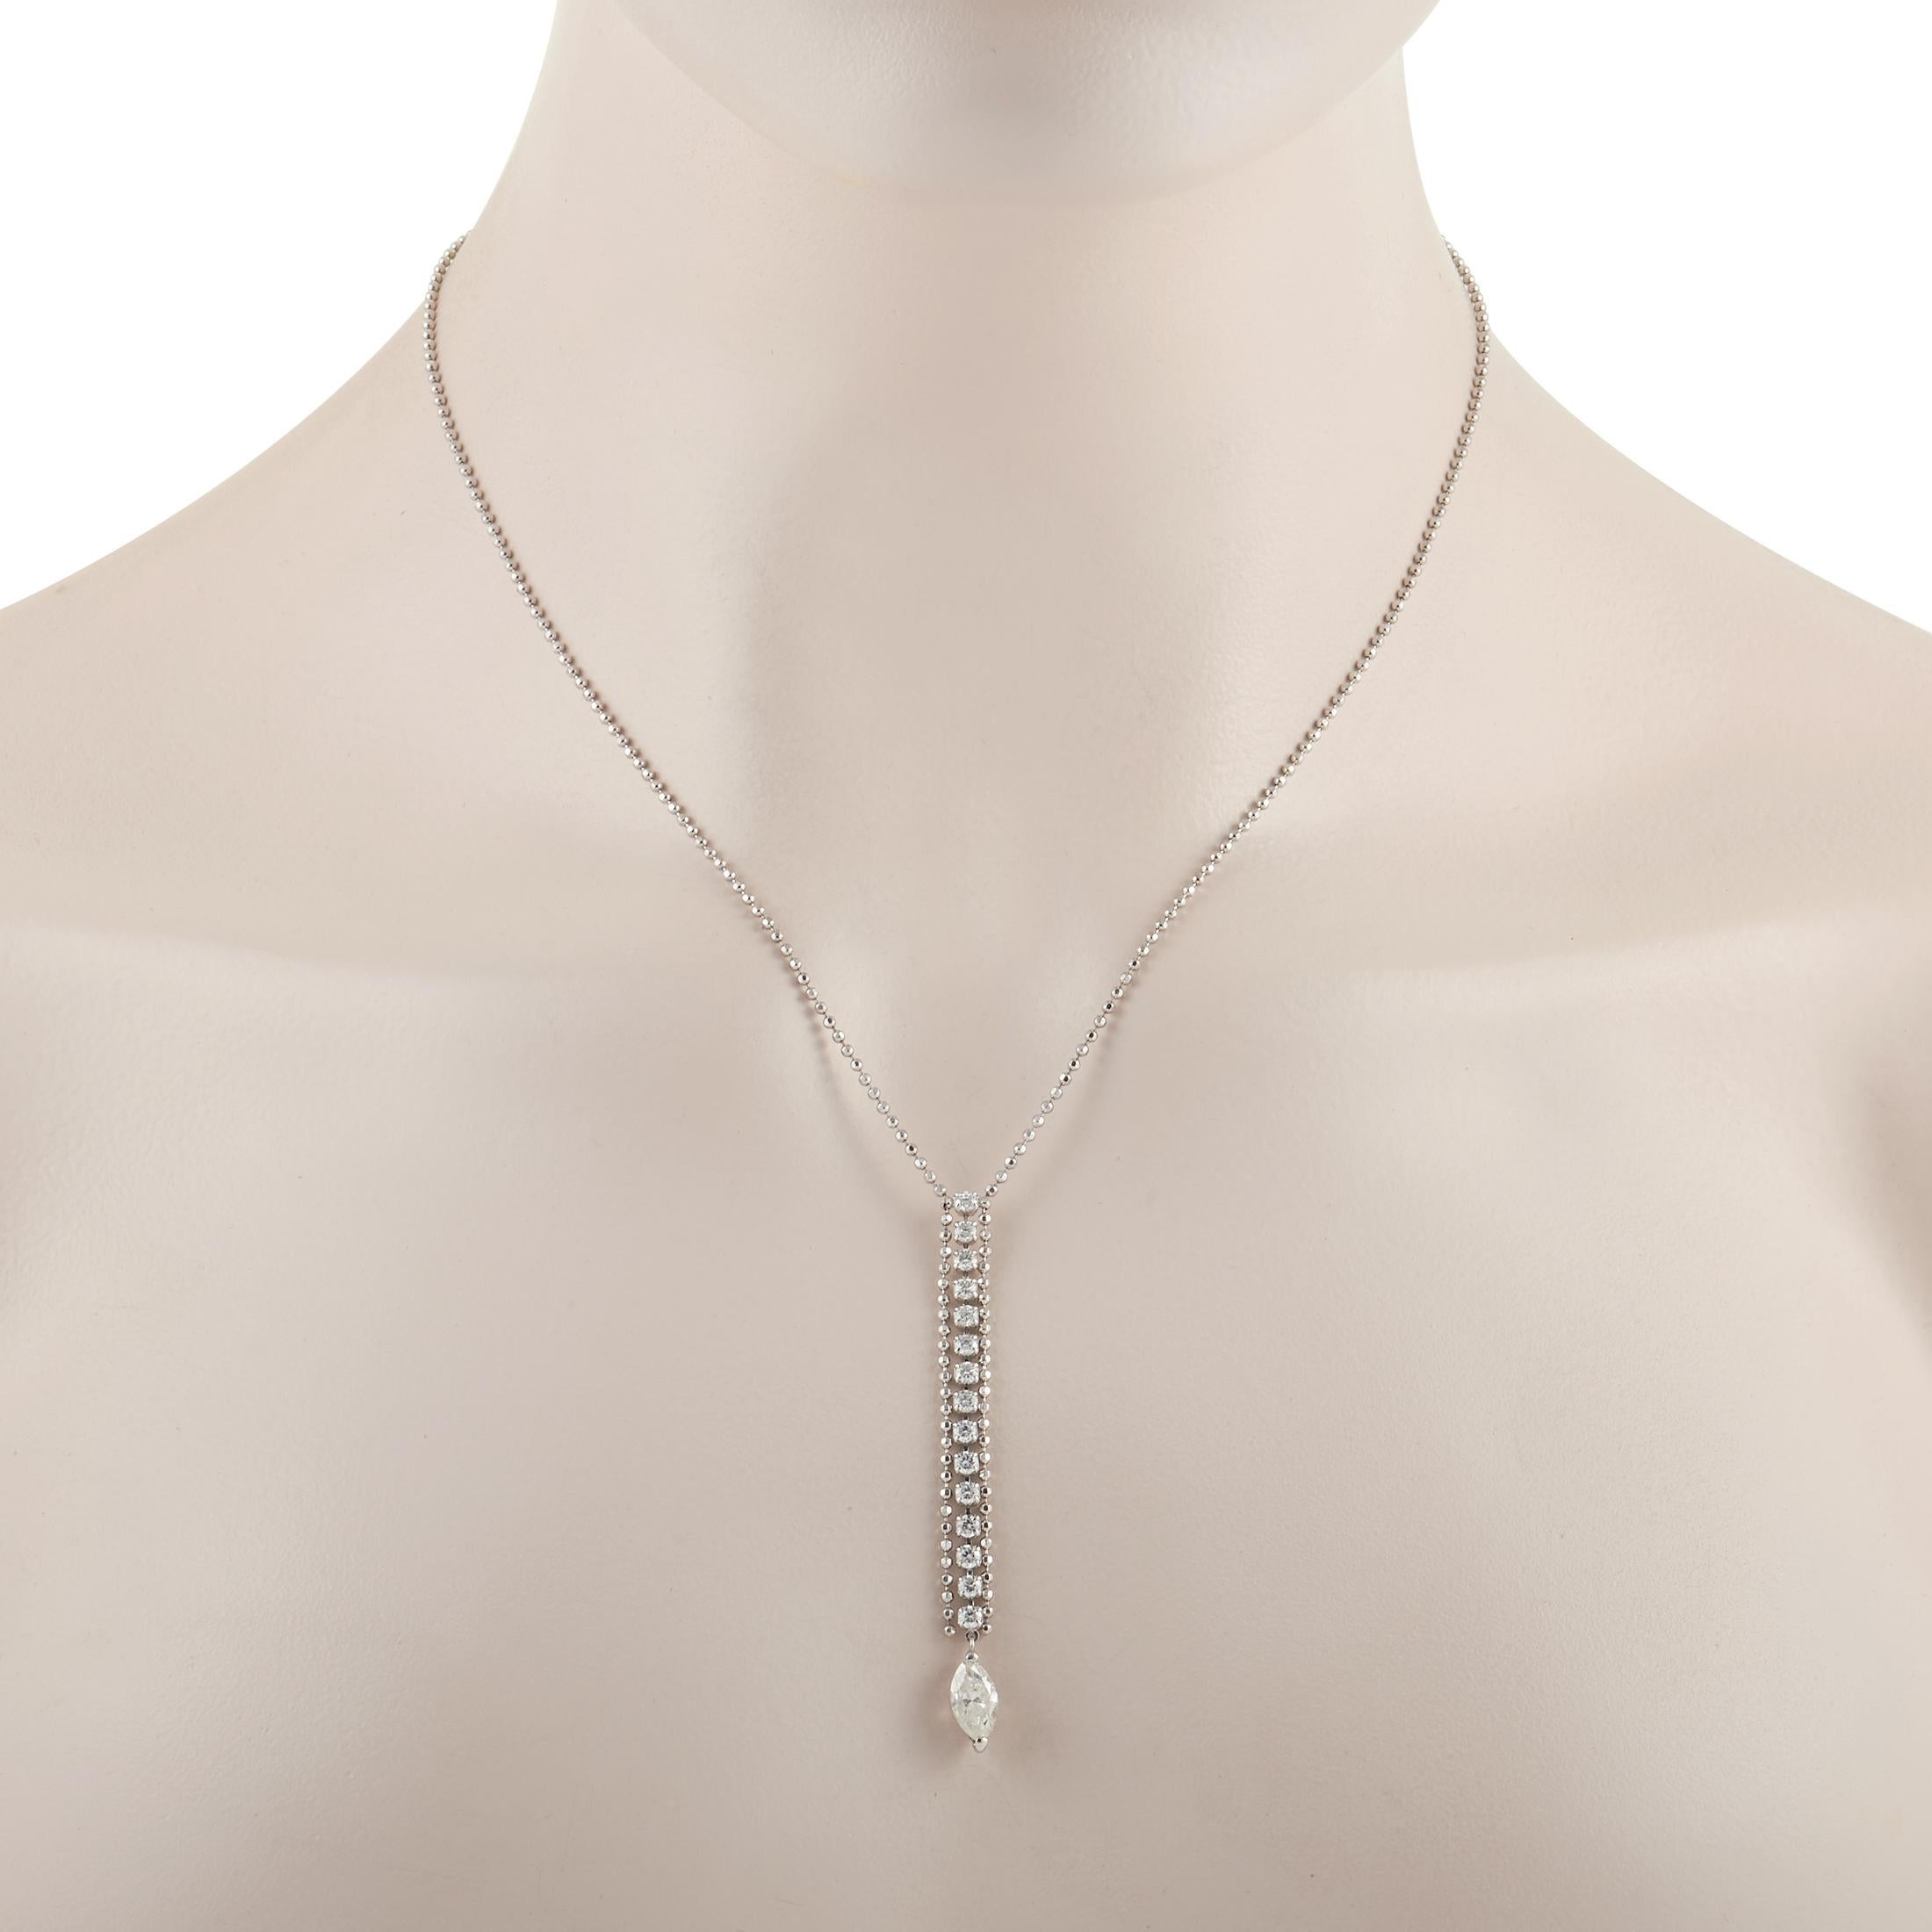 This LB Exclusive 18K White Gold 1.85 Carat Diamond Necklace is a gorgeous statement piece. The necklace is crafted with a simple 18K white gold chain that highlights the diamond drop pendant. The pendant measures 2.5 inches in length by 0.19 inches